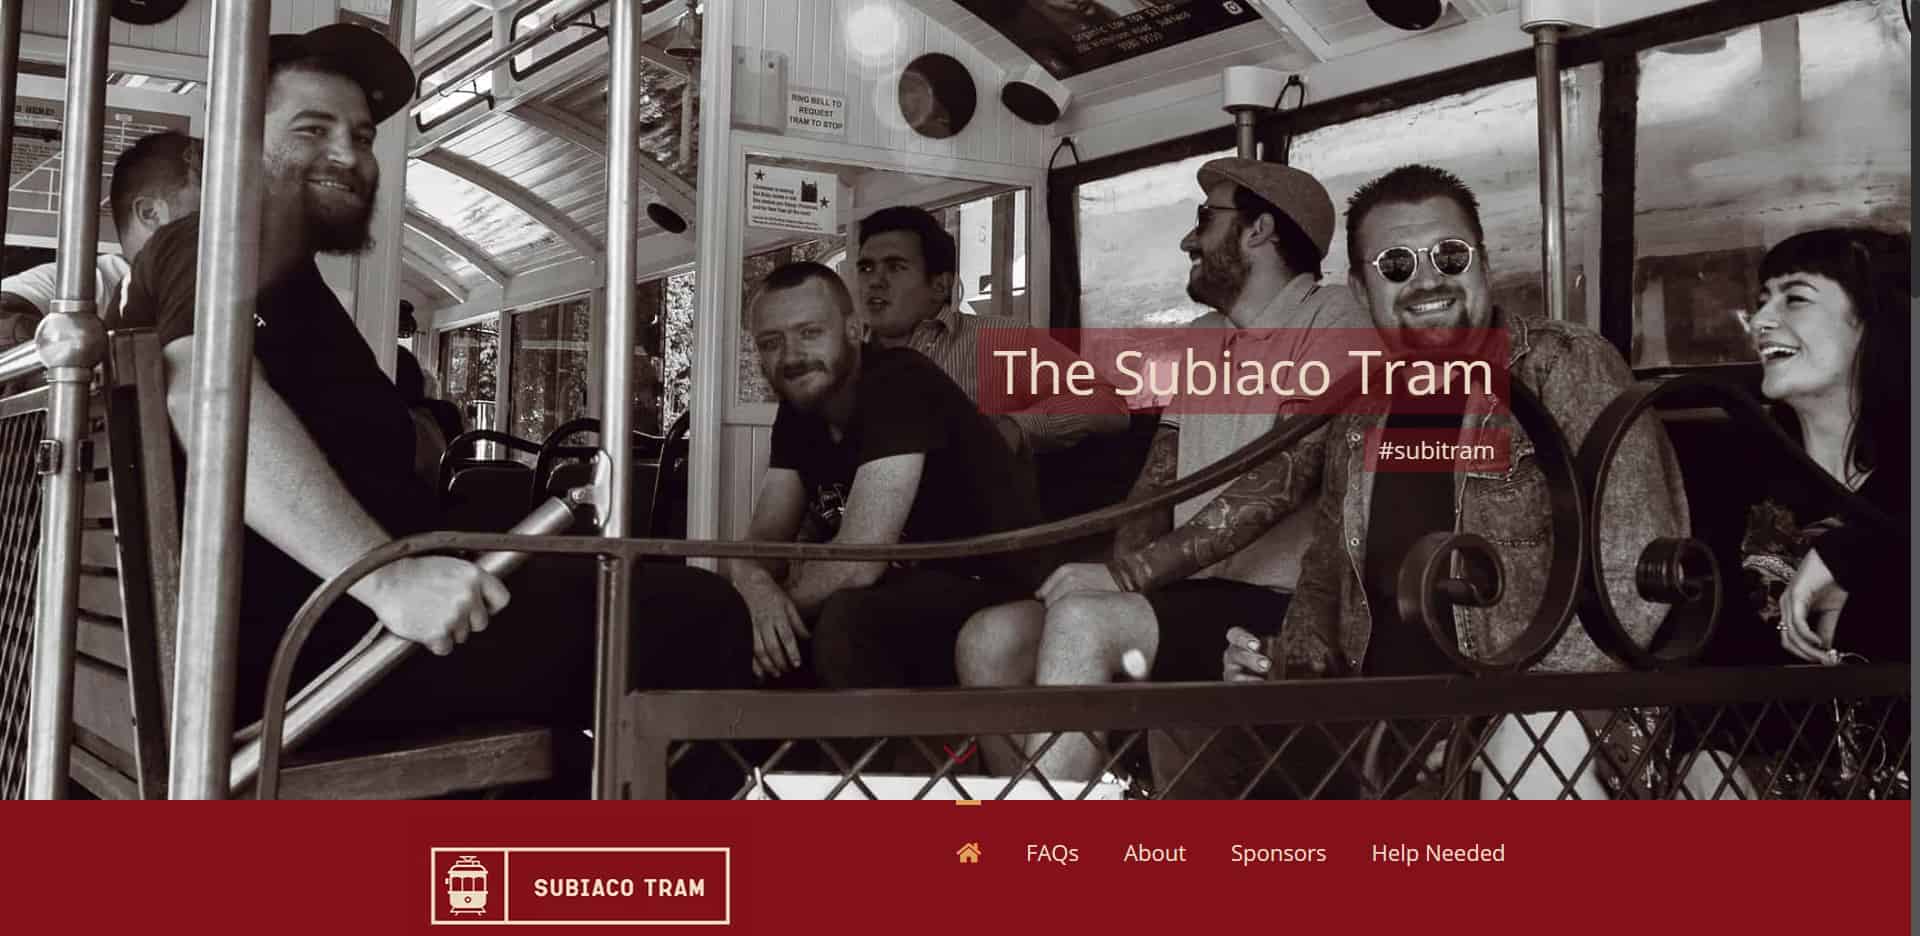 The home page of the subiaco tram website as designed by killer websites